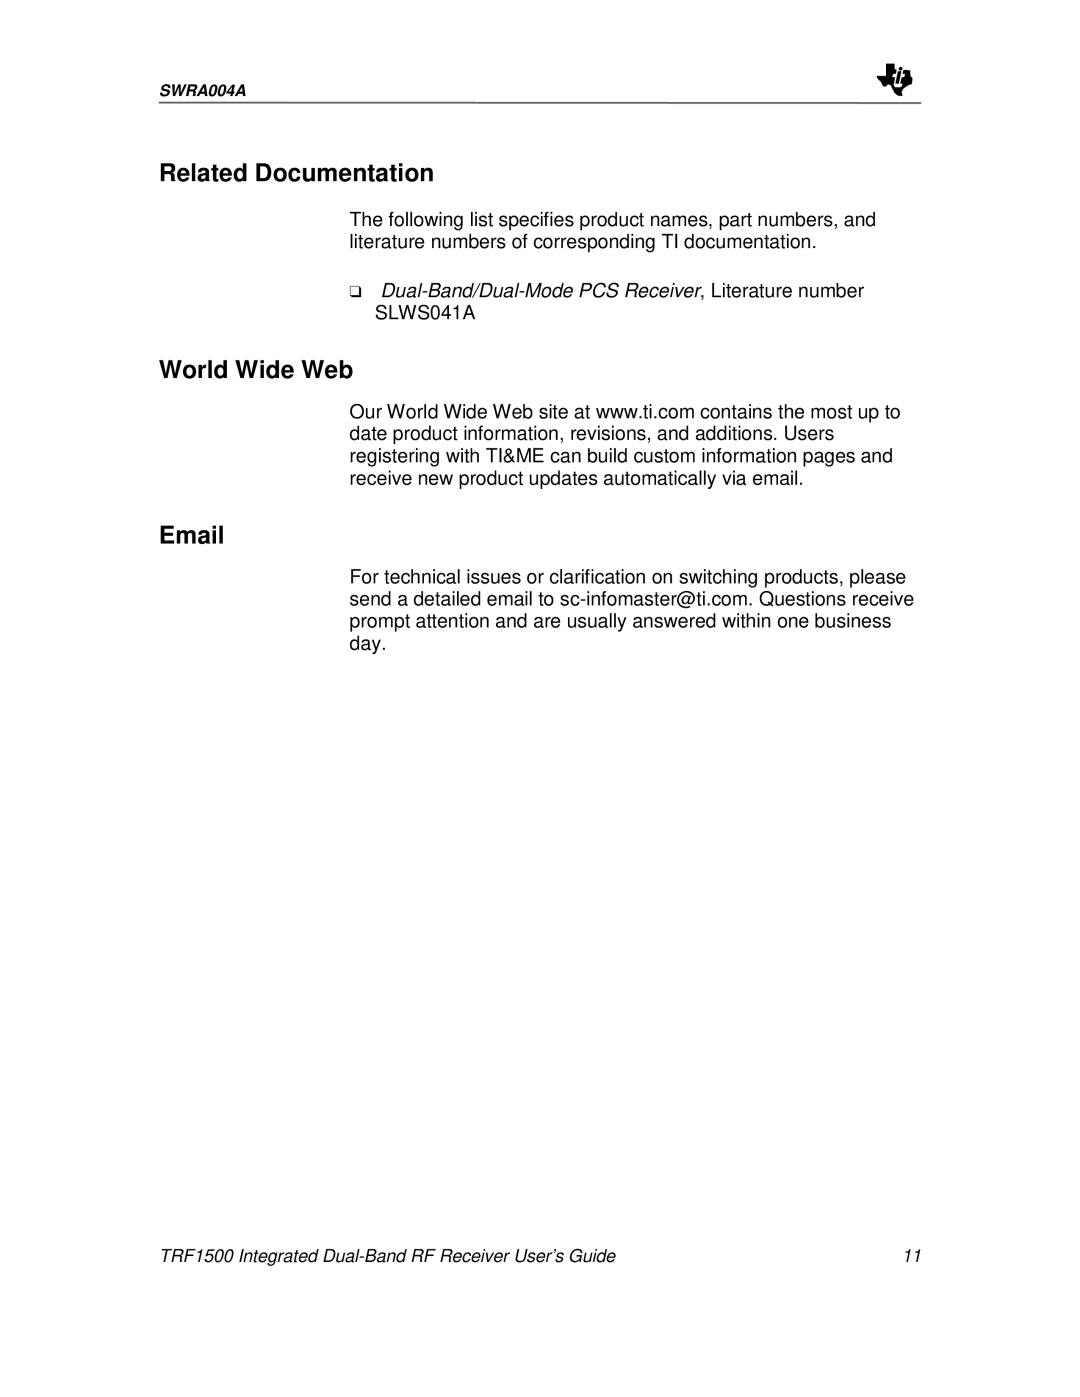 Texas Instruments TRF1500 manual Related Documentation, World Wide Web 